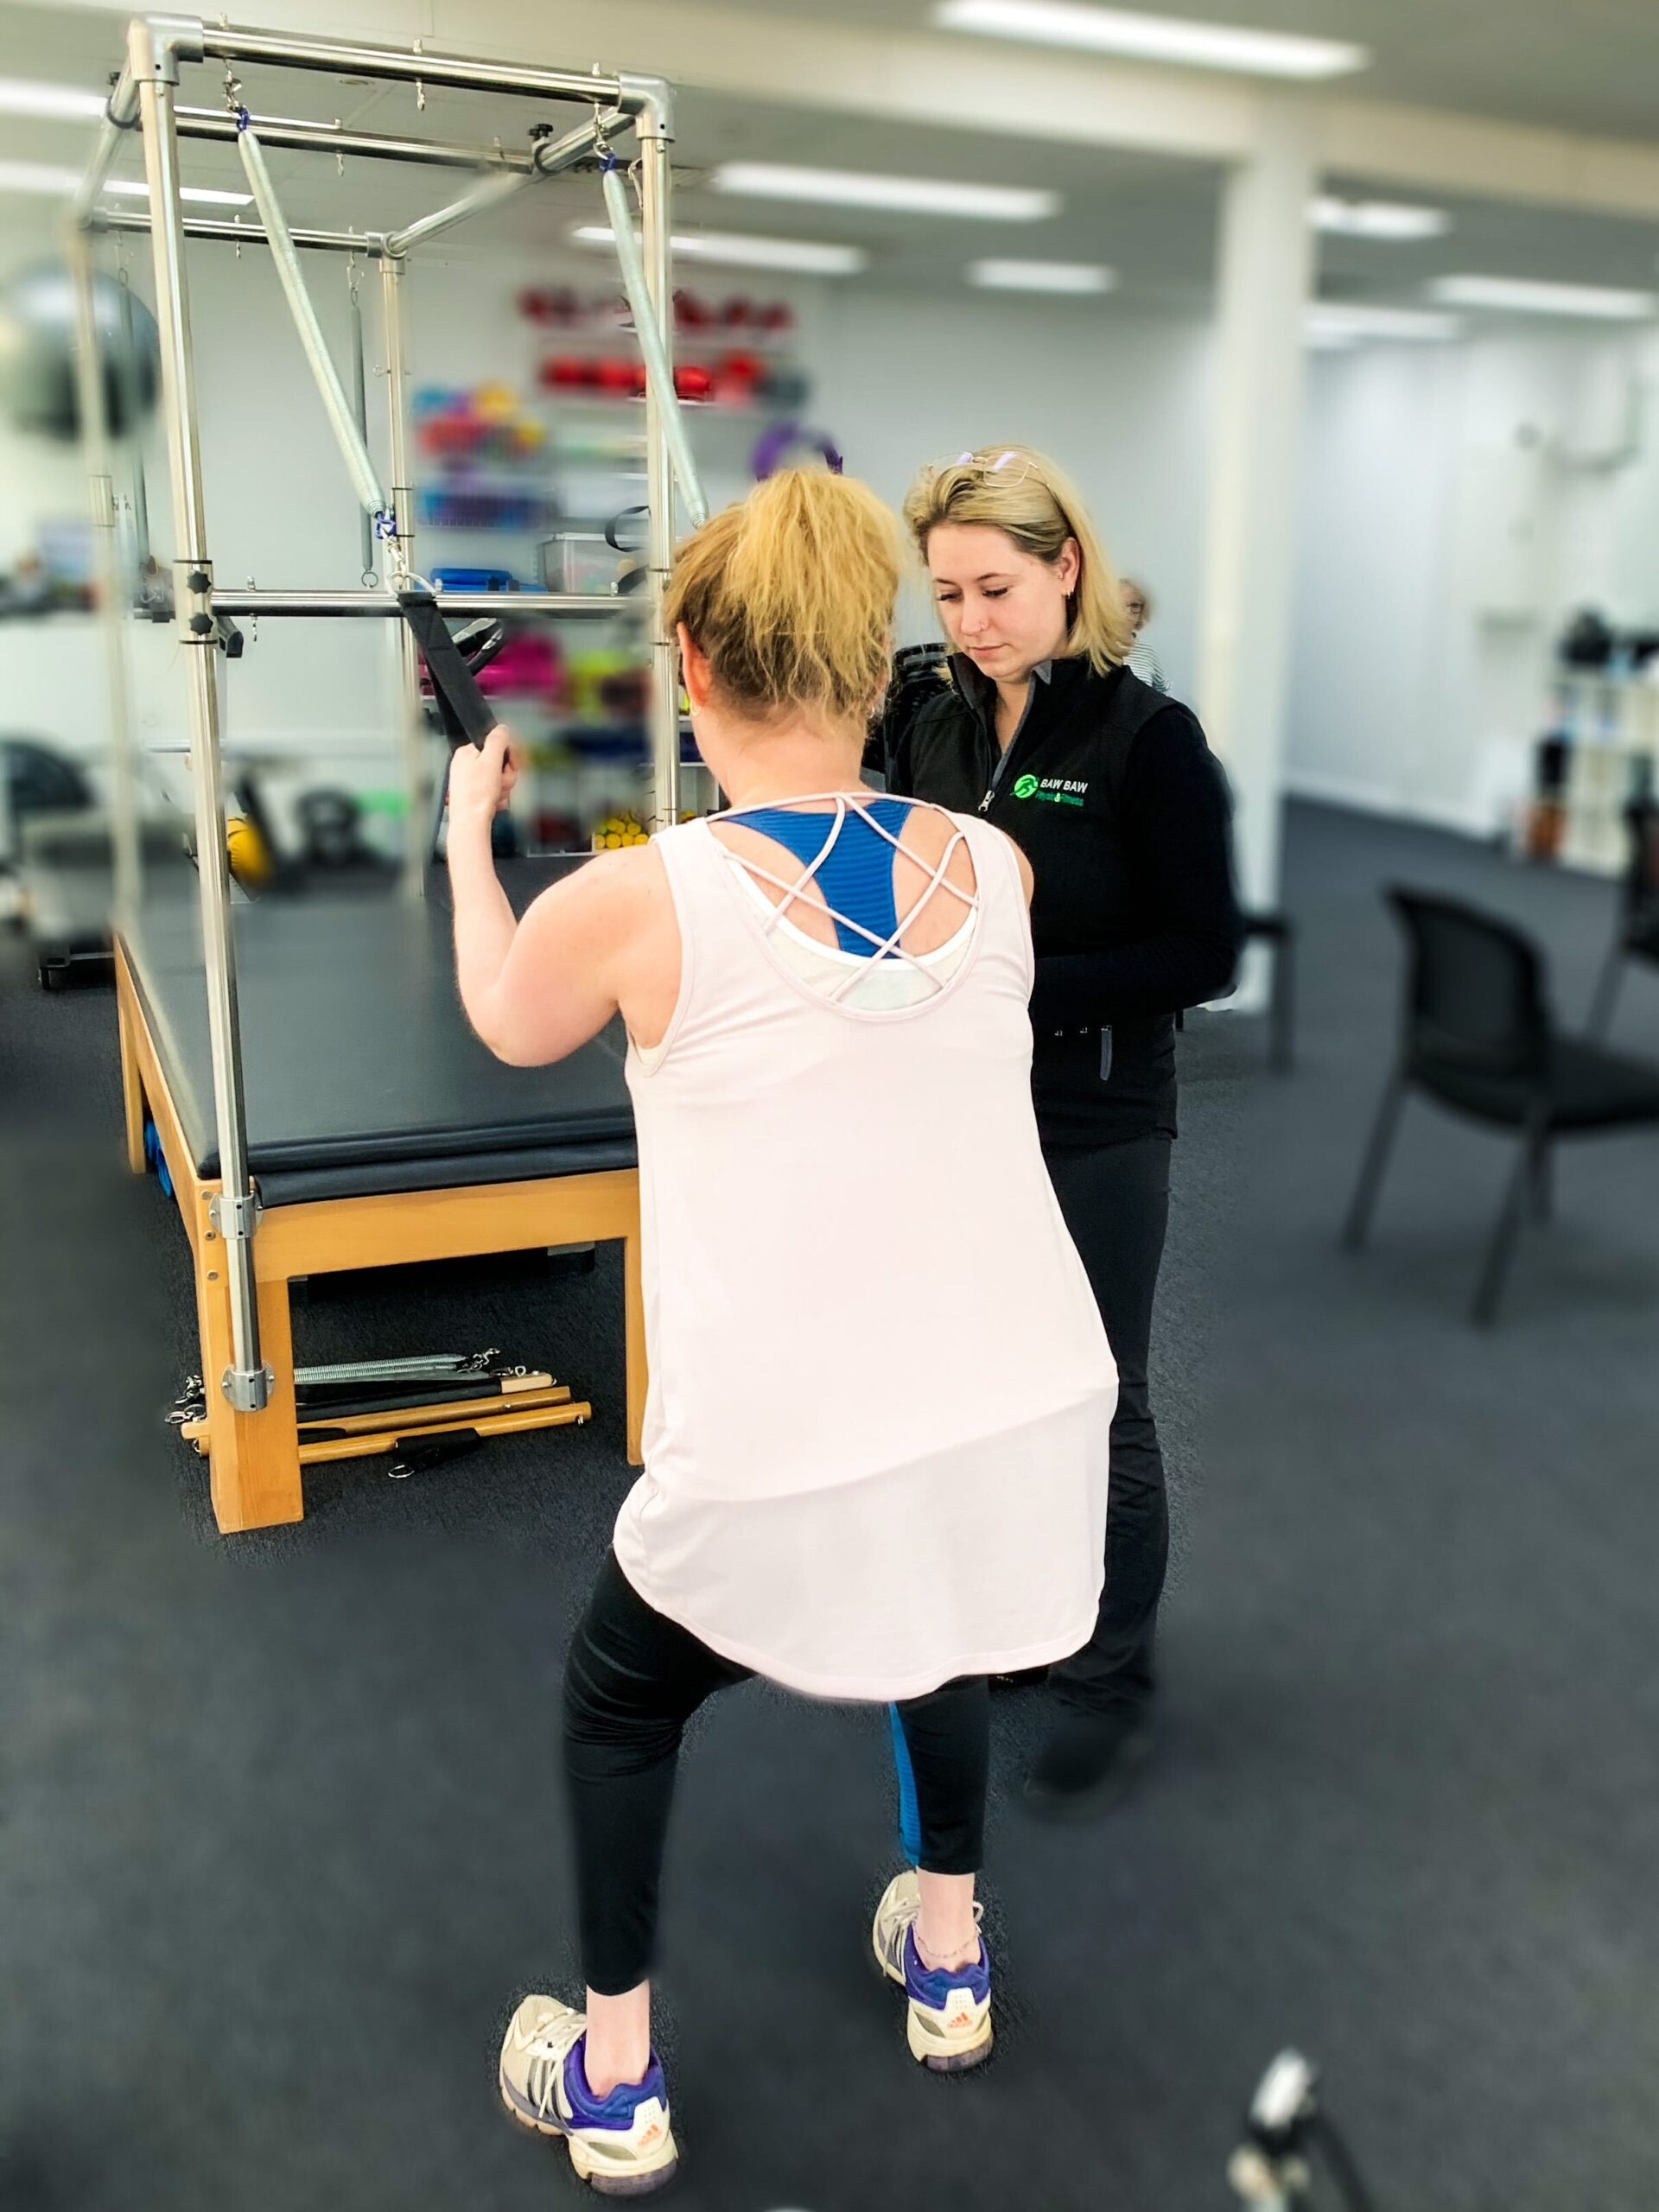 This image shows a client using our pilates trapeze table. The client is behind the trap table and using the hand pully's to assist them with a squat. A practitioner is supervising in the background.